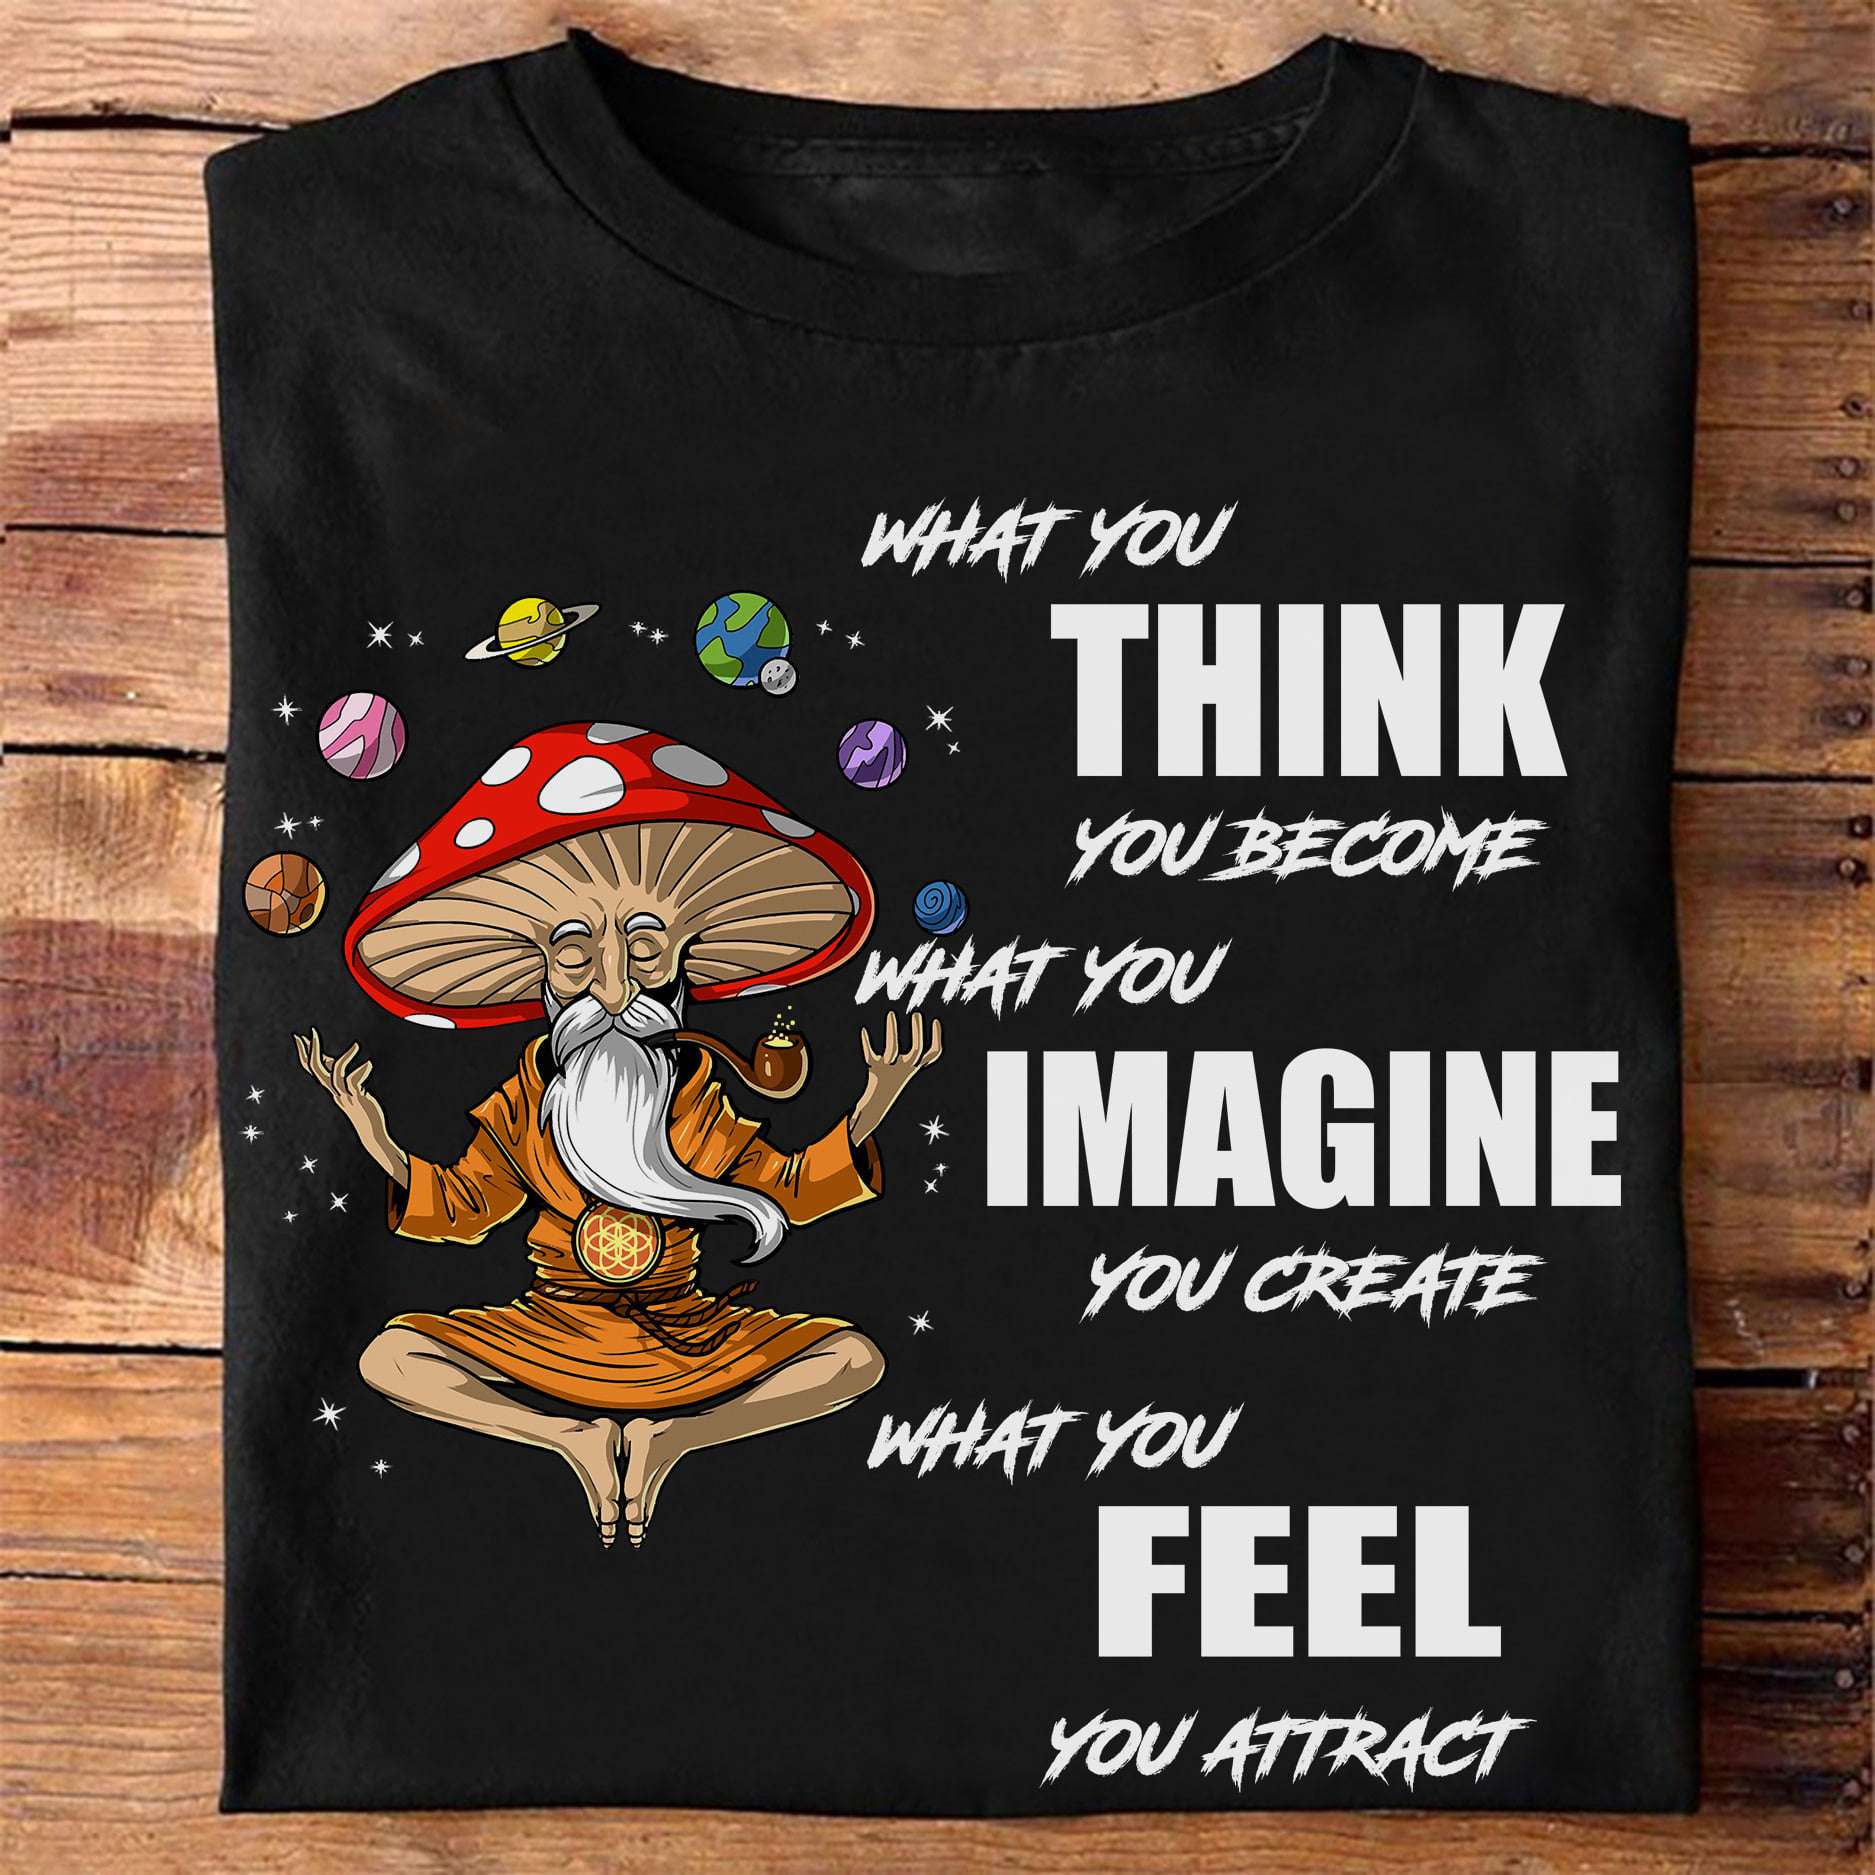 What you think you become what you imagine you create what you feel you attract - Mushroom head old man, solar system